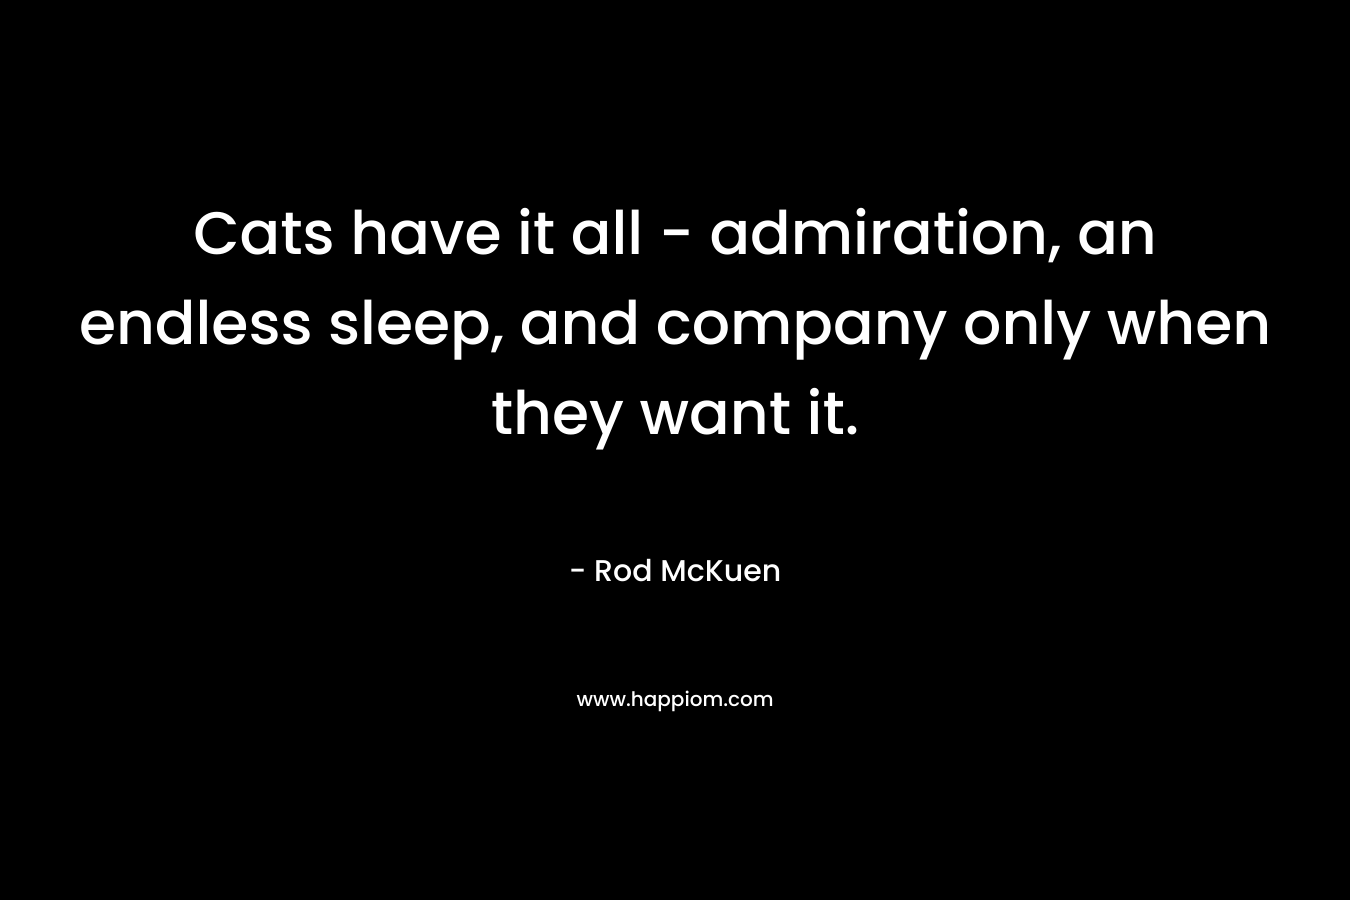 Cats have it all – admiration, an endless sleep, and company only when they want it. – Rod McKuen